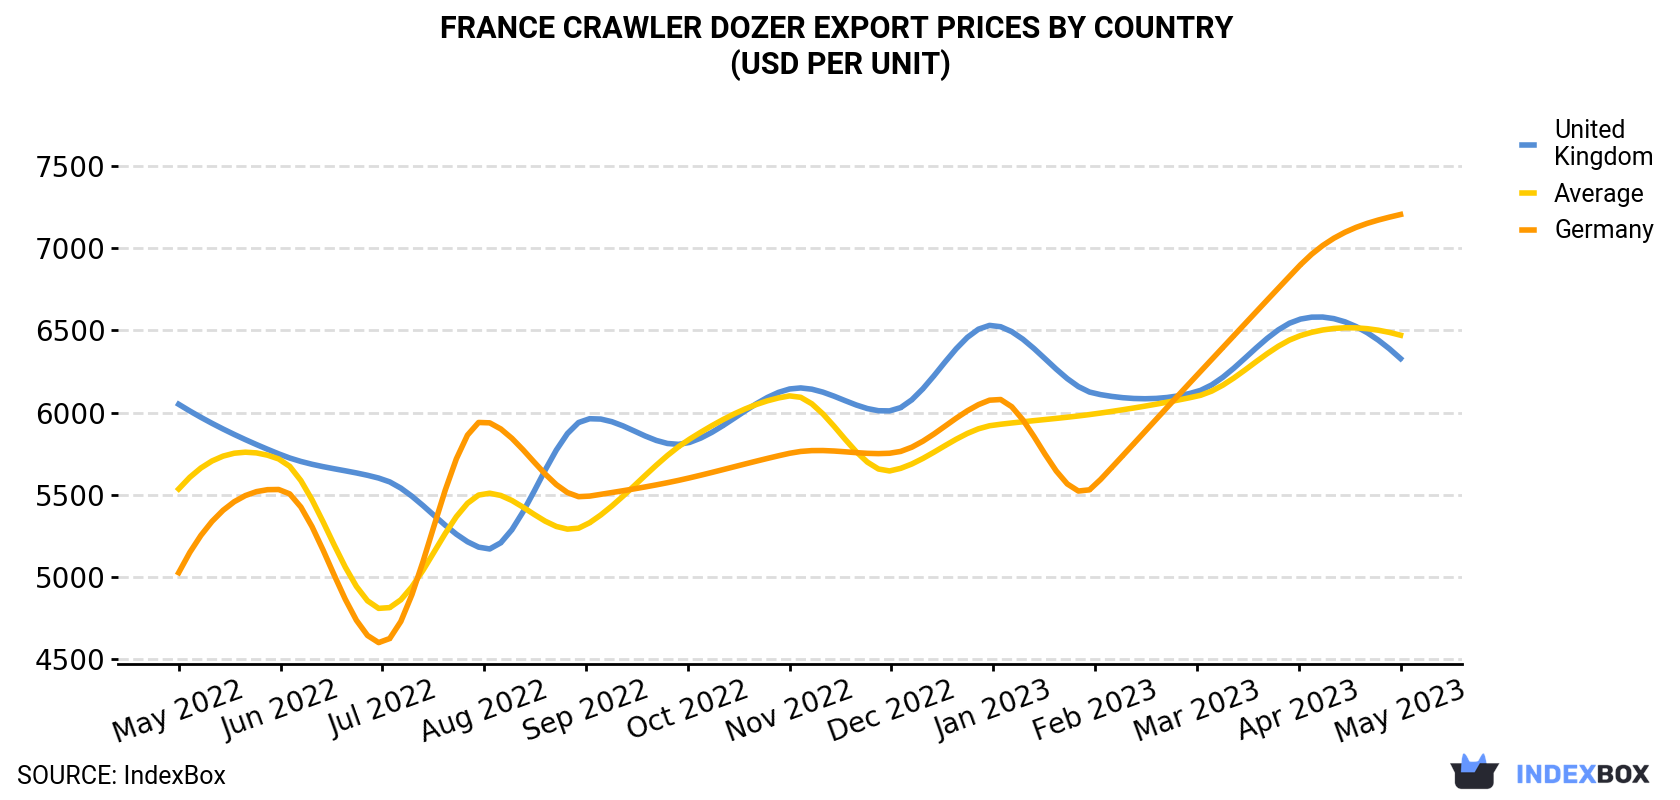 France Crawler Dozer Export Prices By Country (USD Per Unit)